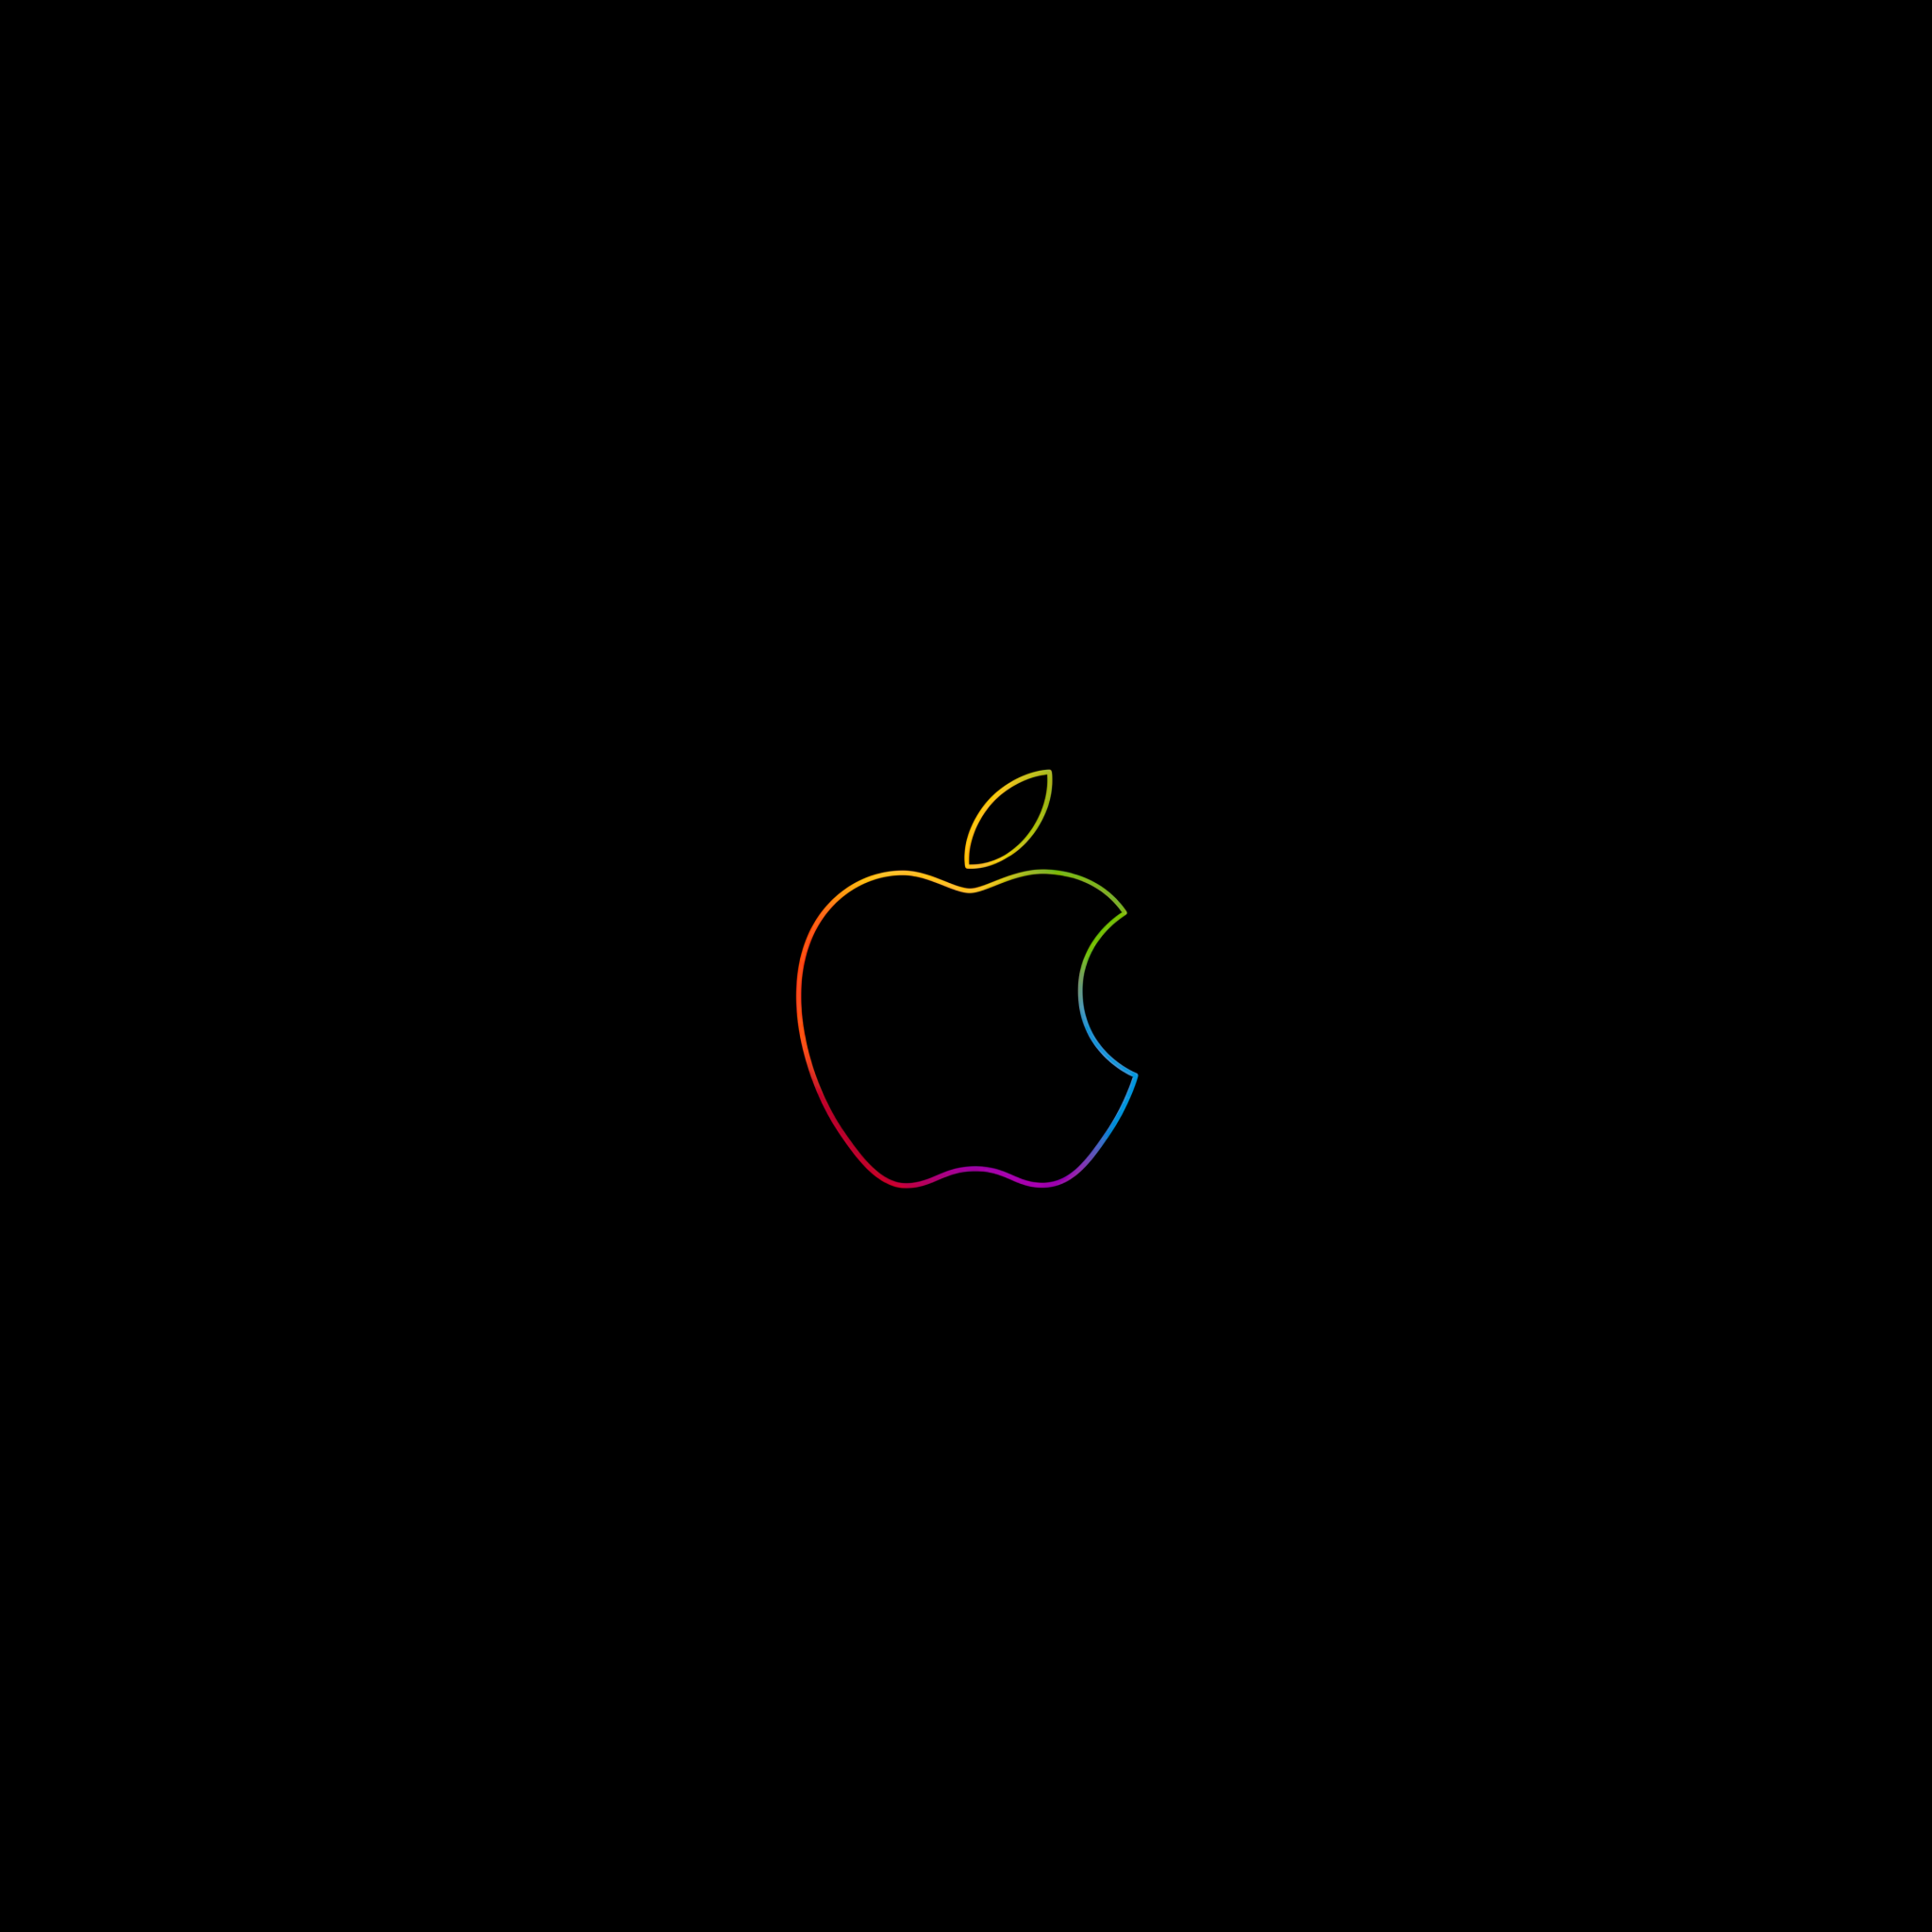 Wallpaper Apple, Logo, Graphics, Apples, Black and White, Background -  Download Free Image